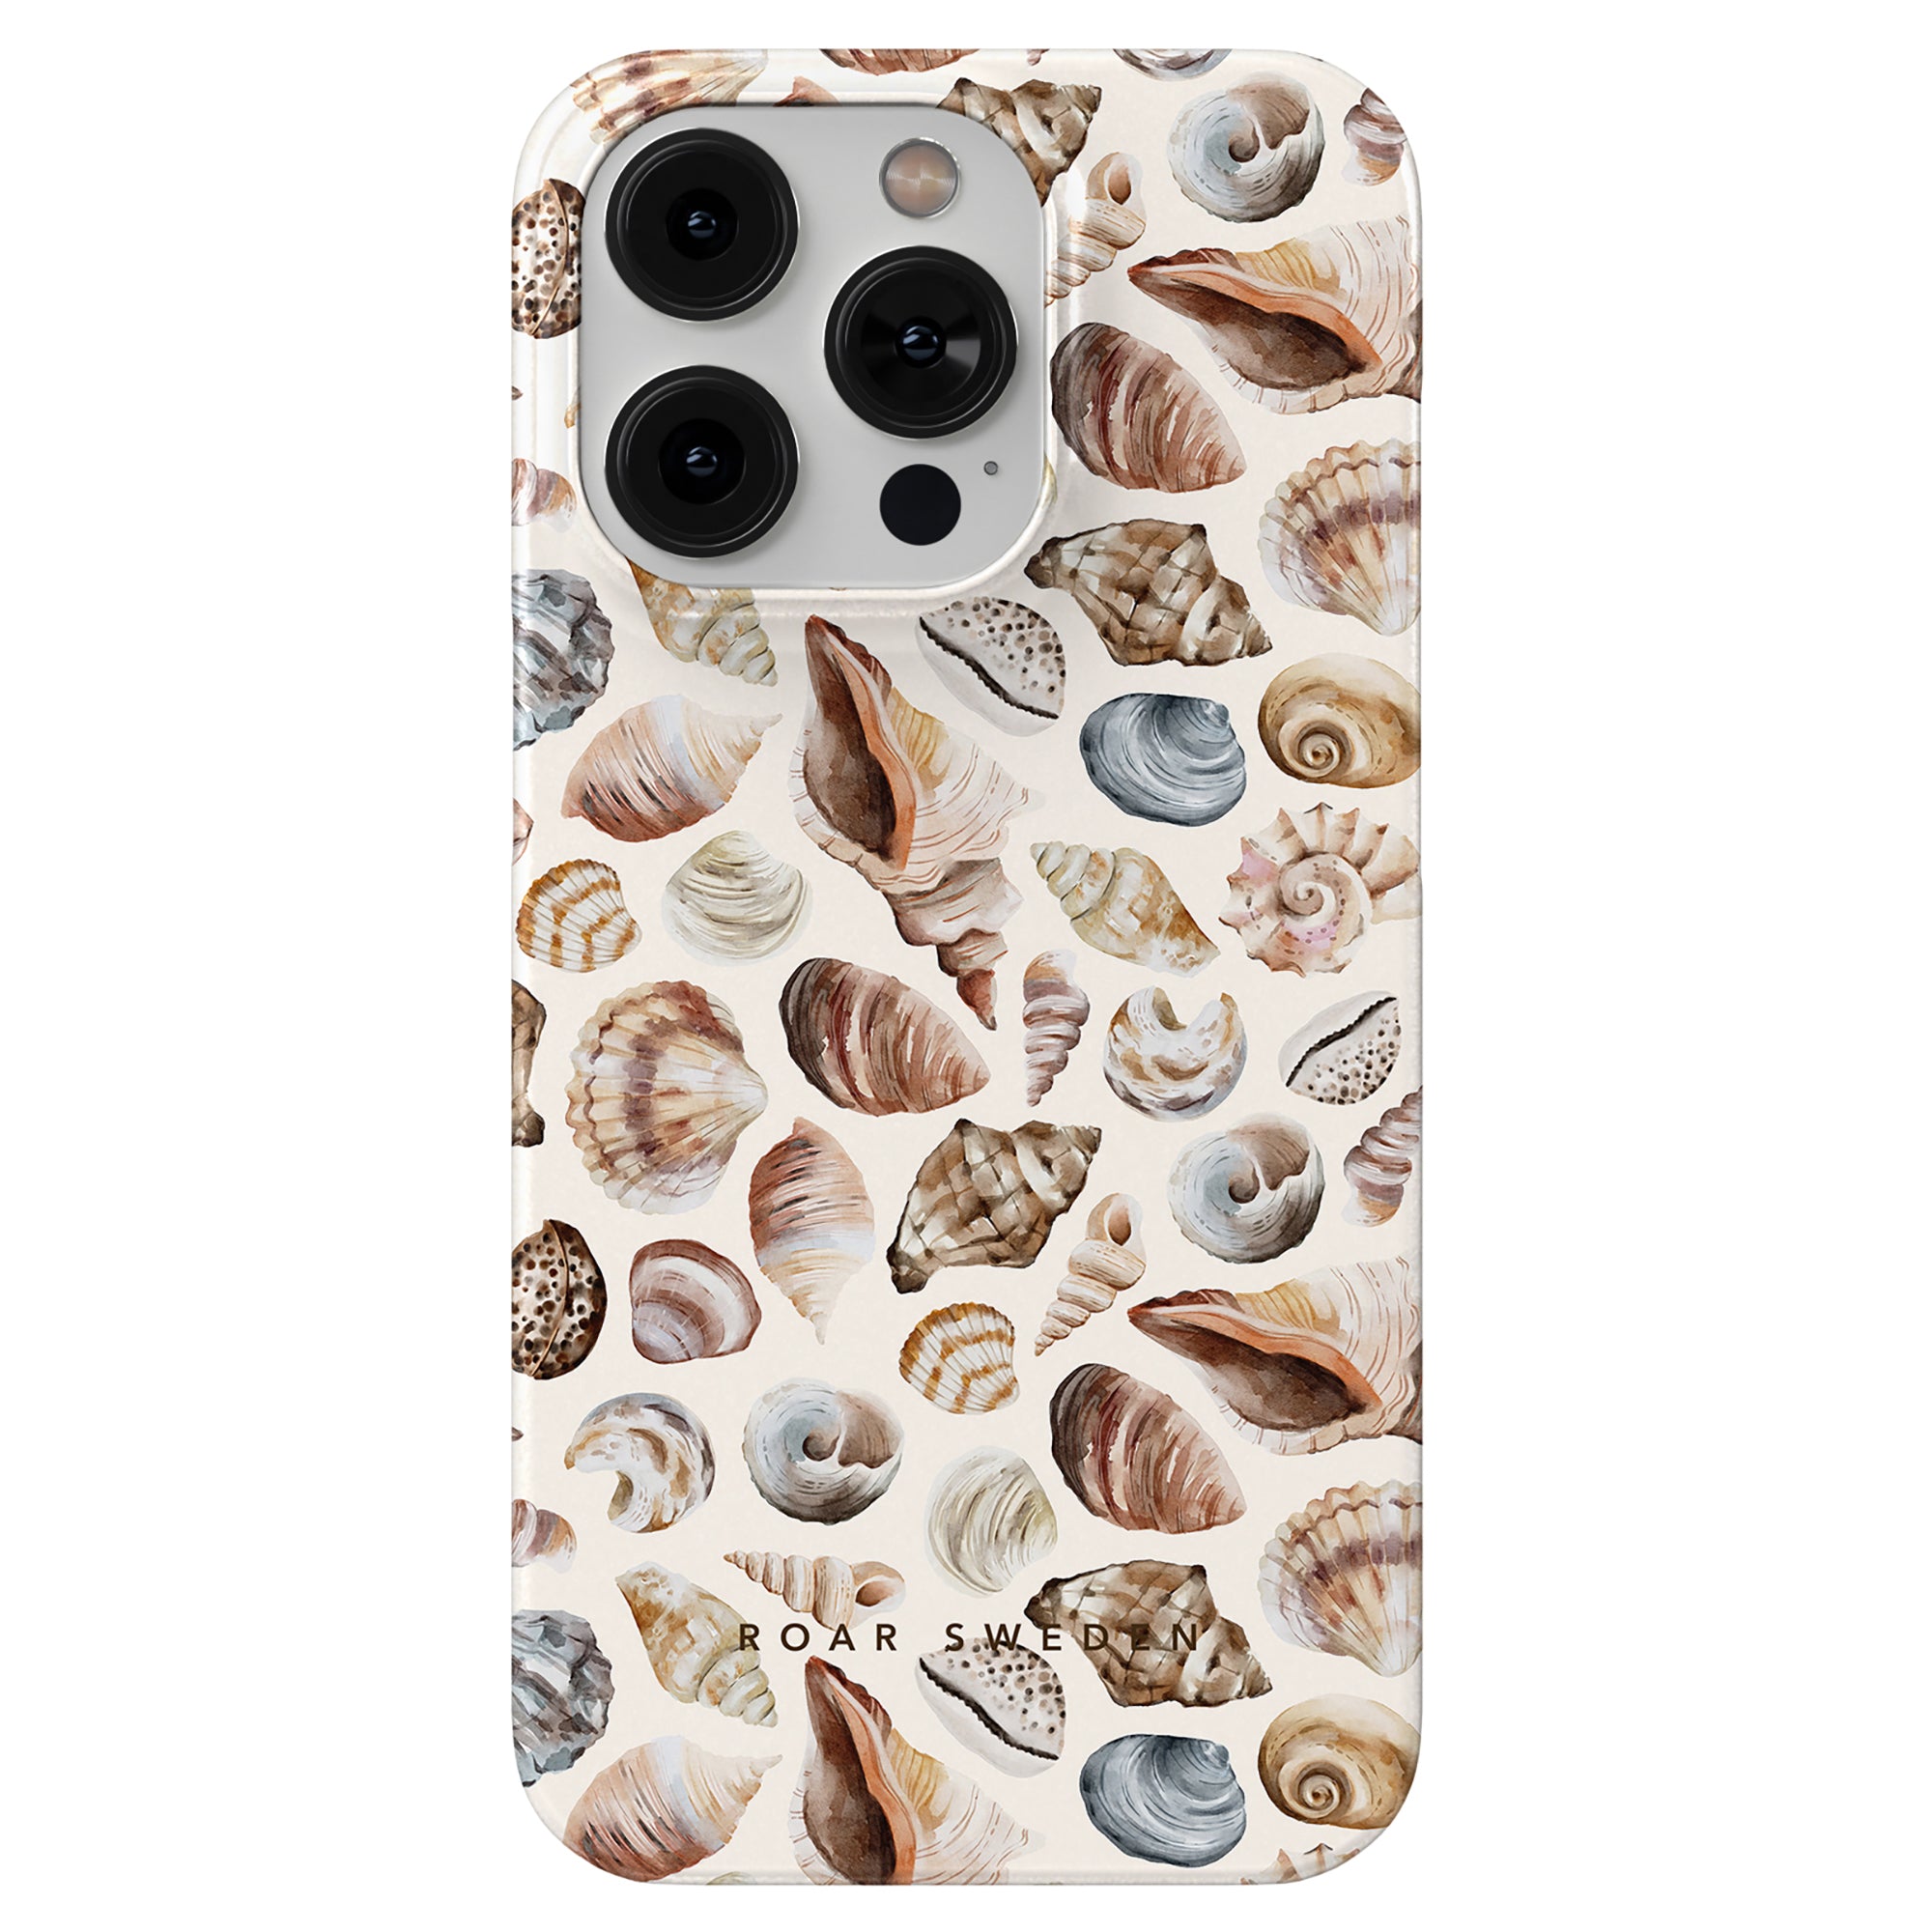 Sentence with replaced product name: Enhance your SEO with a Beach Shells - Slim case featuring an elegant seashell pattern design in our product description.